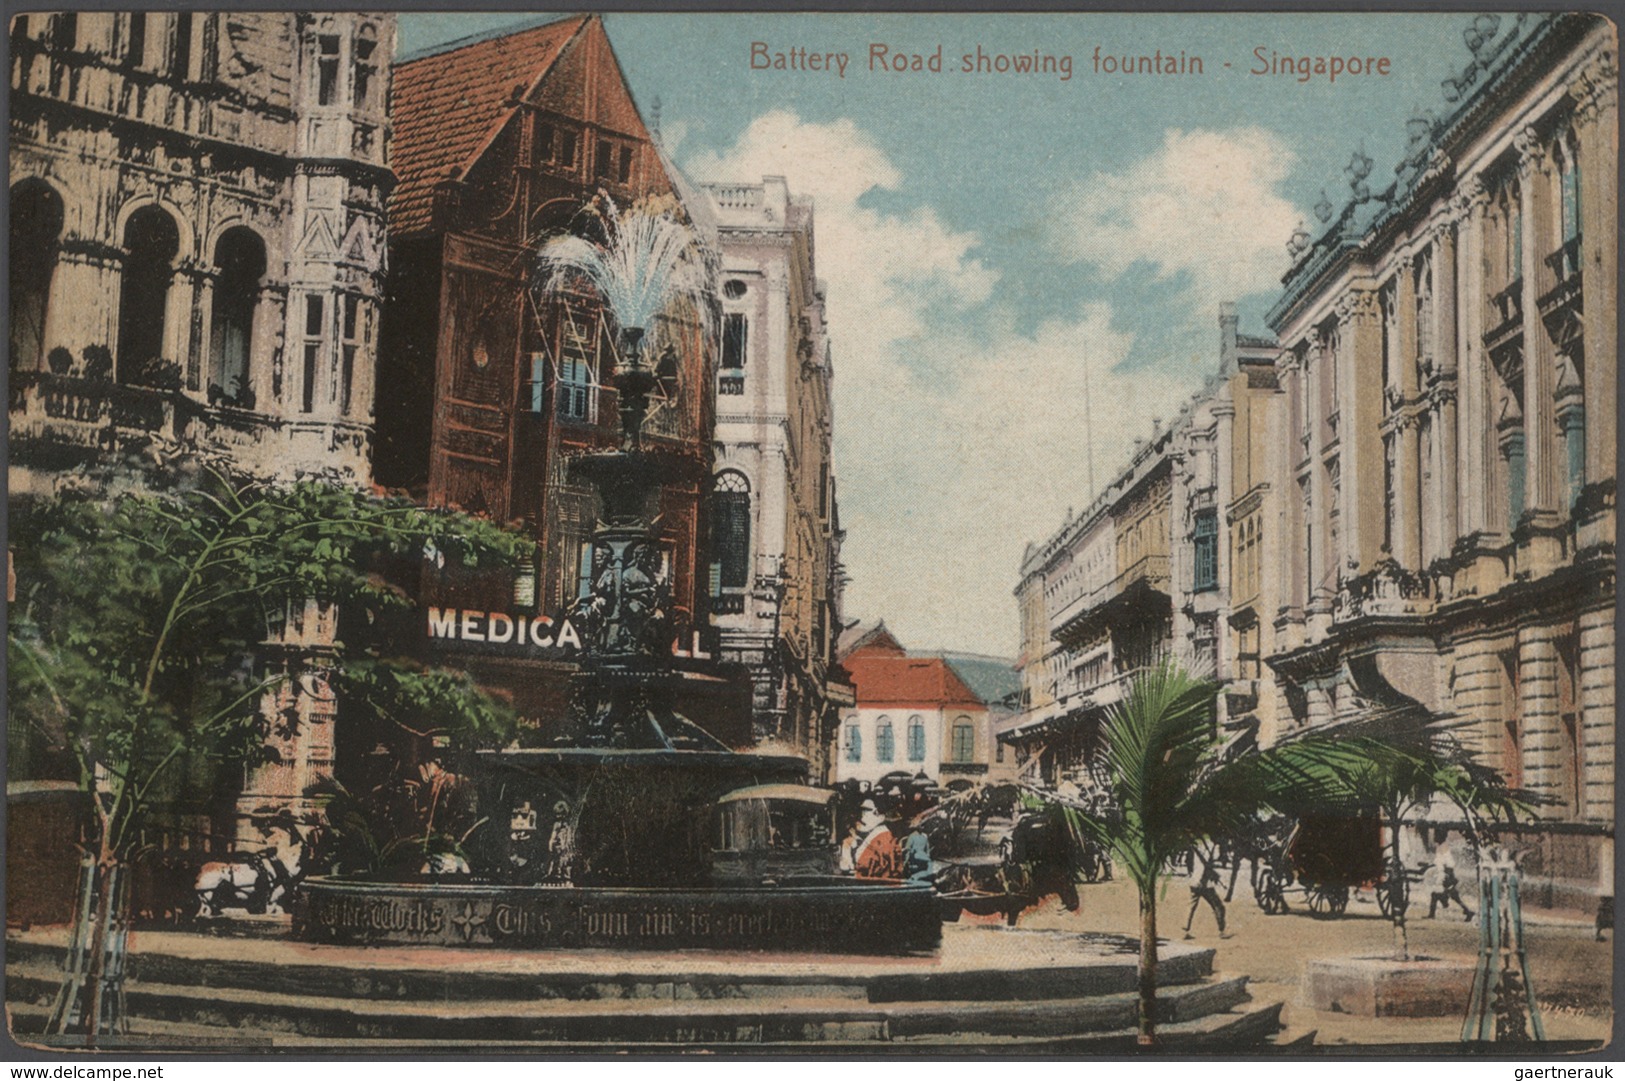 Singapur: 1930's-2000's: Two big boxes filled up with hundreds and hundreds of picture postcards, wi